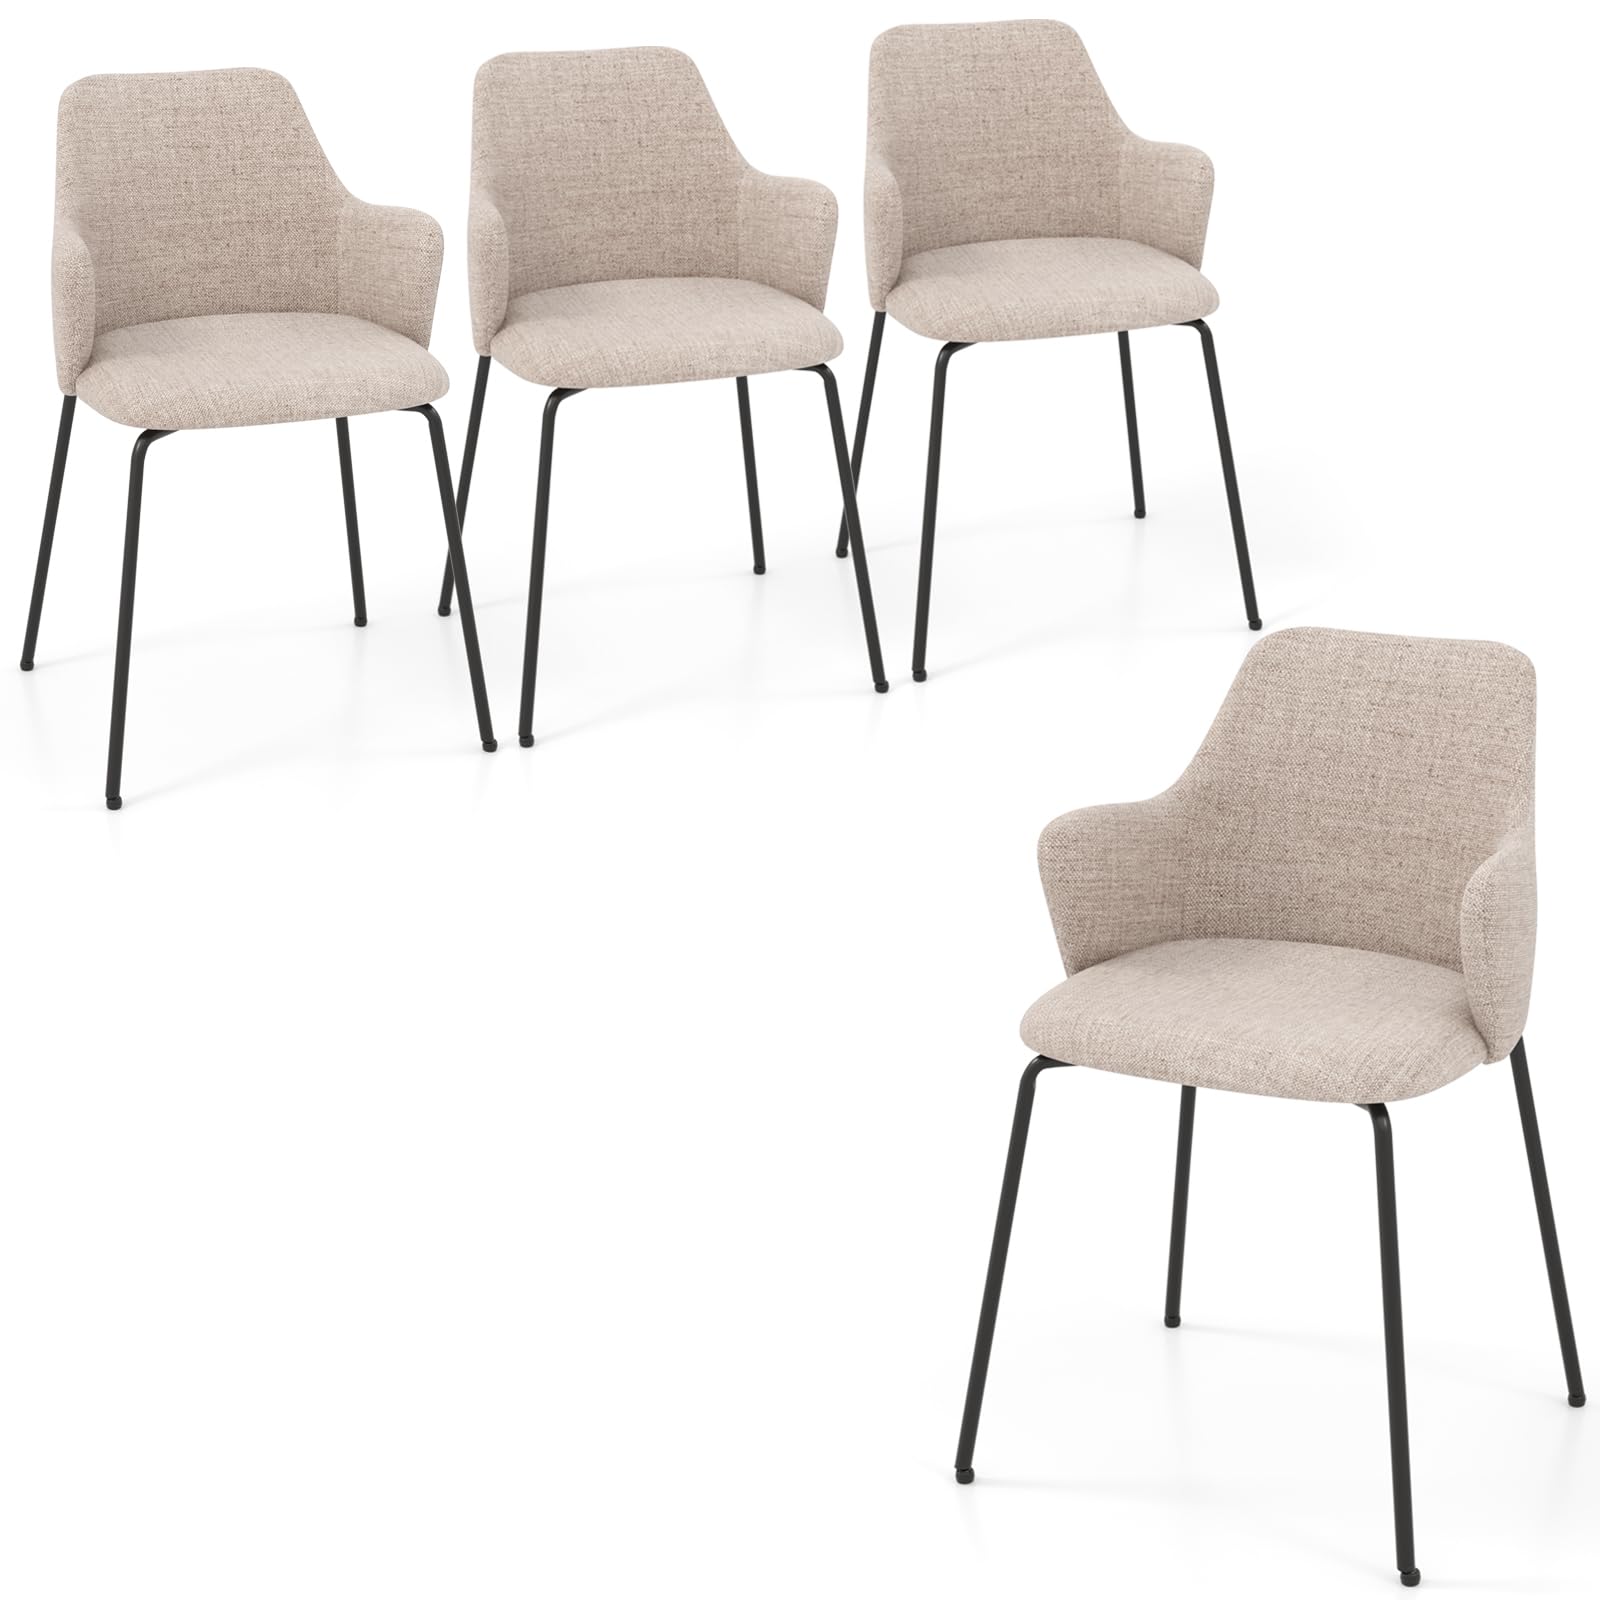 Giantex Dining Chairs Set, Upholstered Accent Chairs w/Curved Backrest